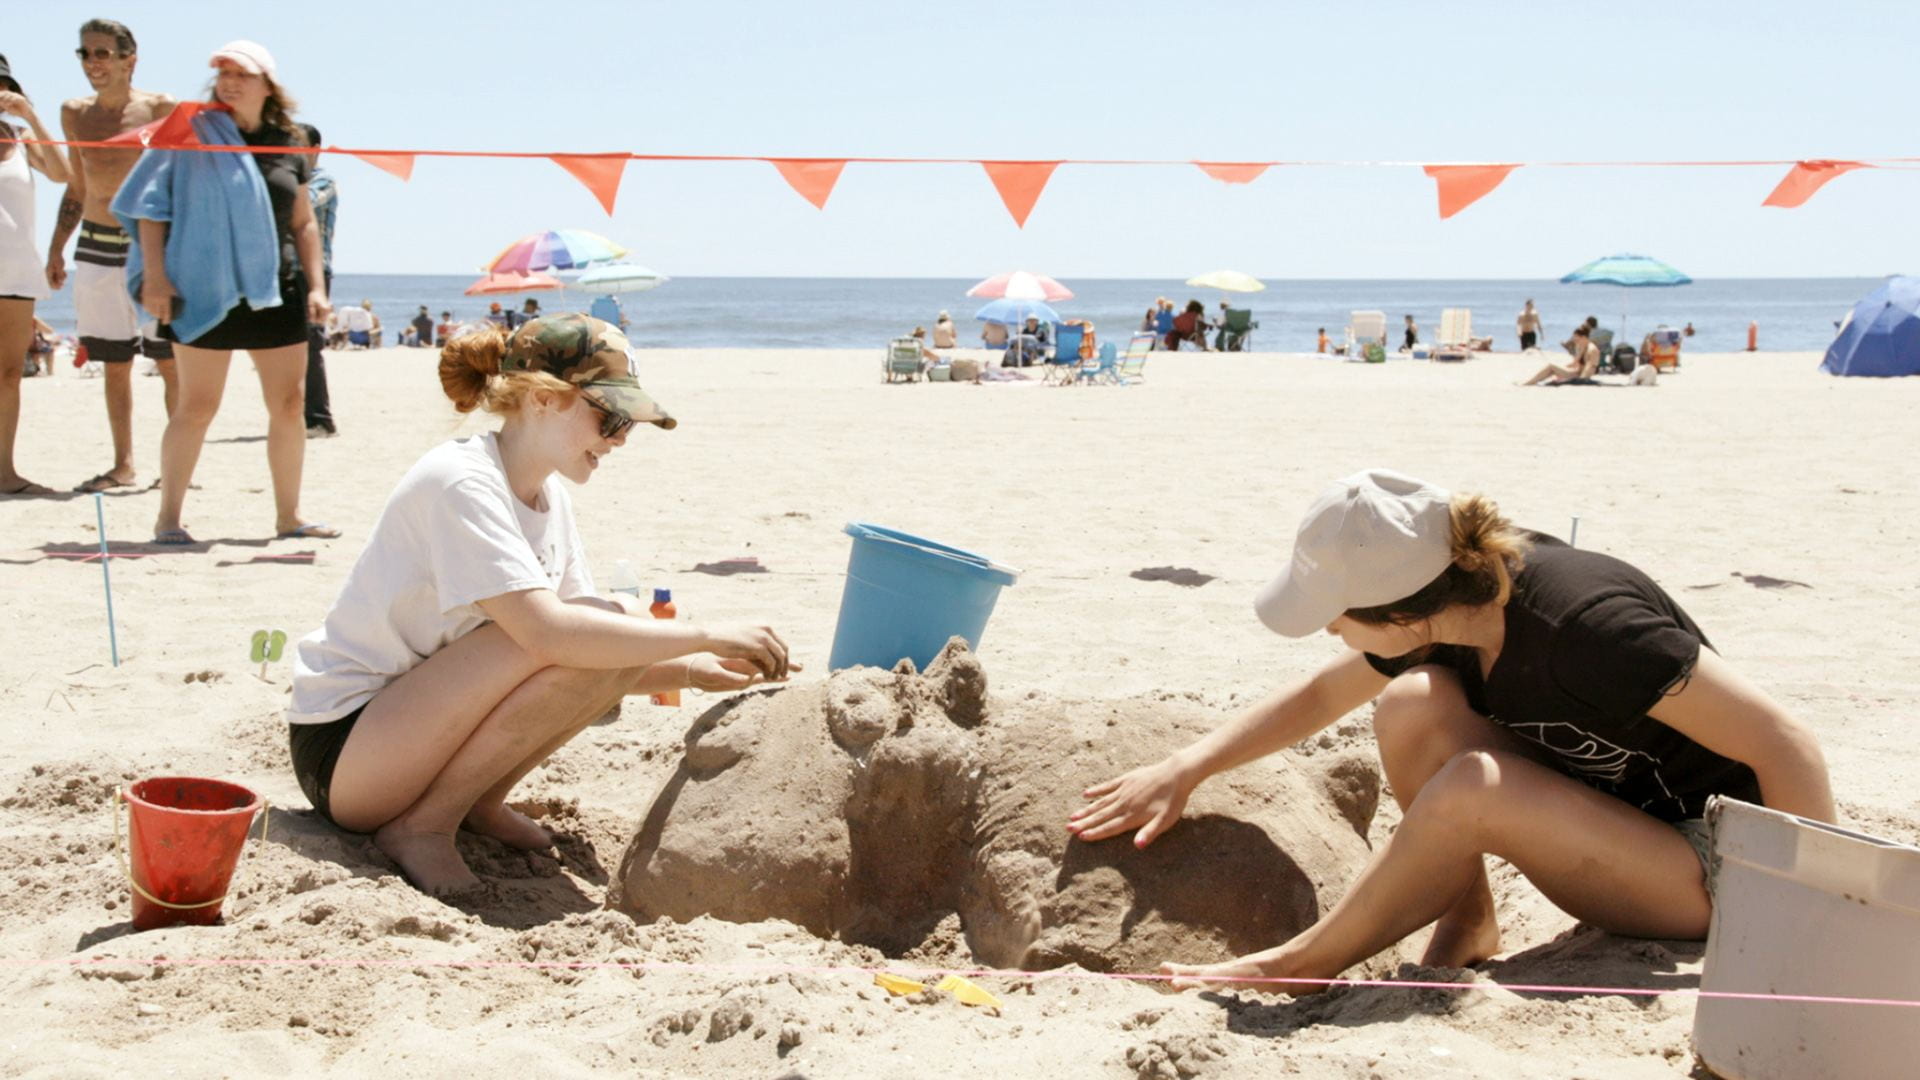 Still on two women on the beach making a sandcastle from The Hottest August